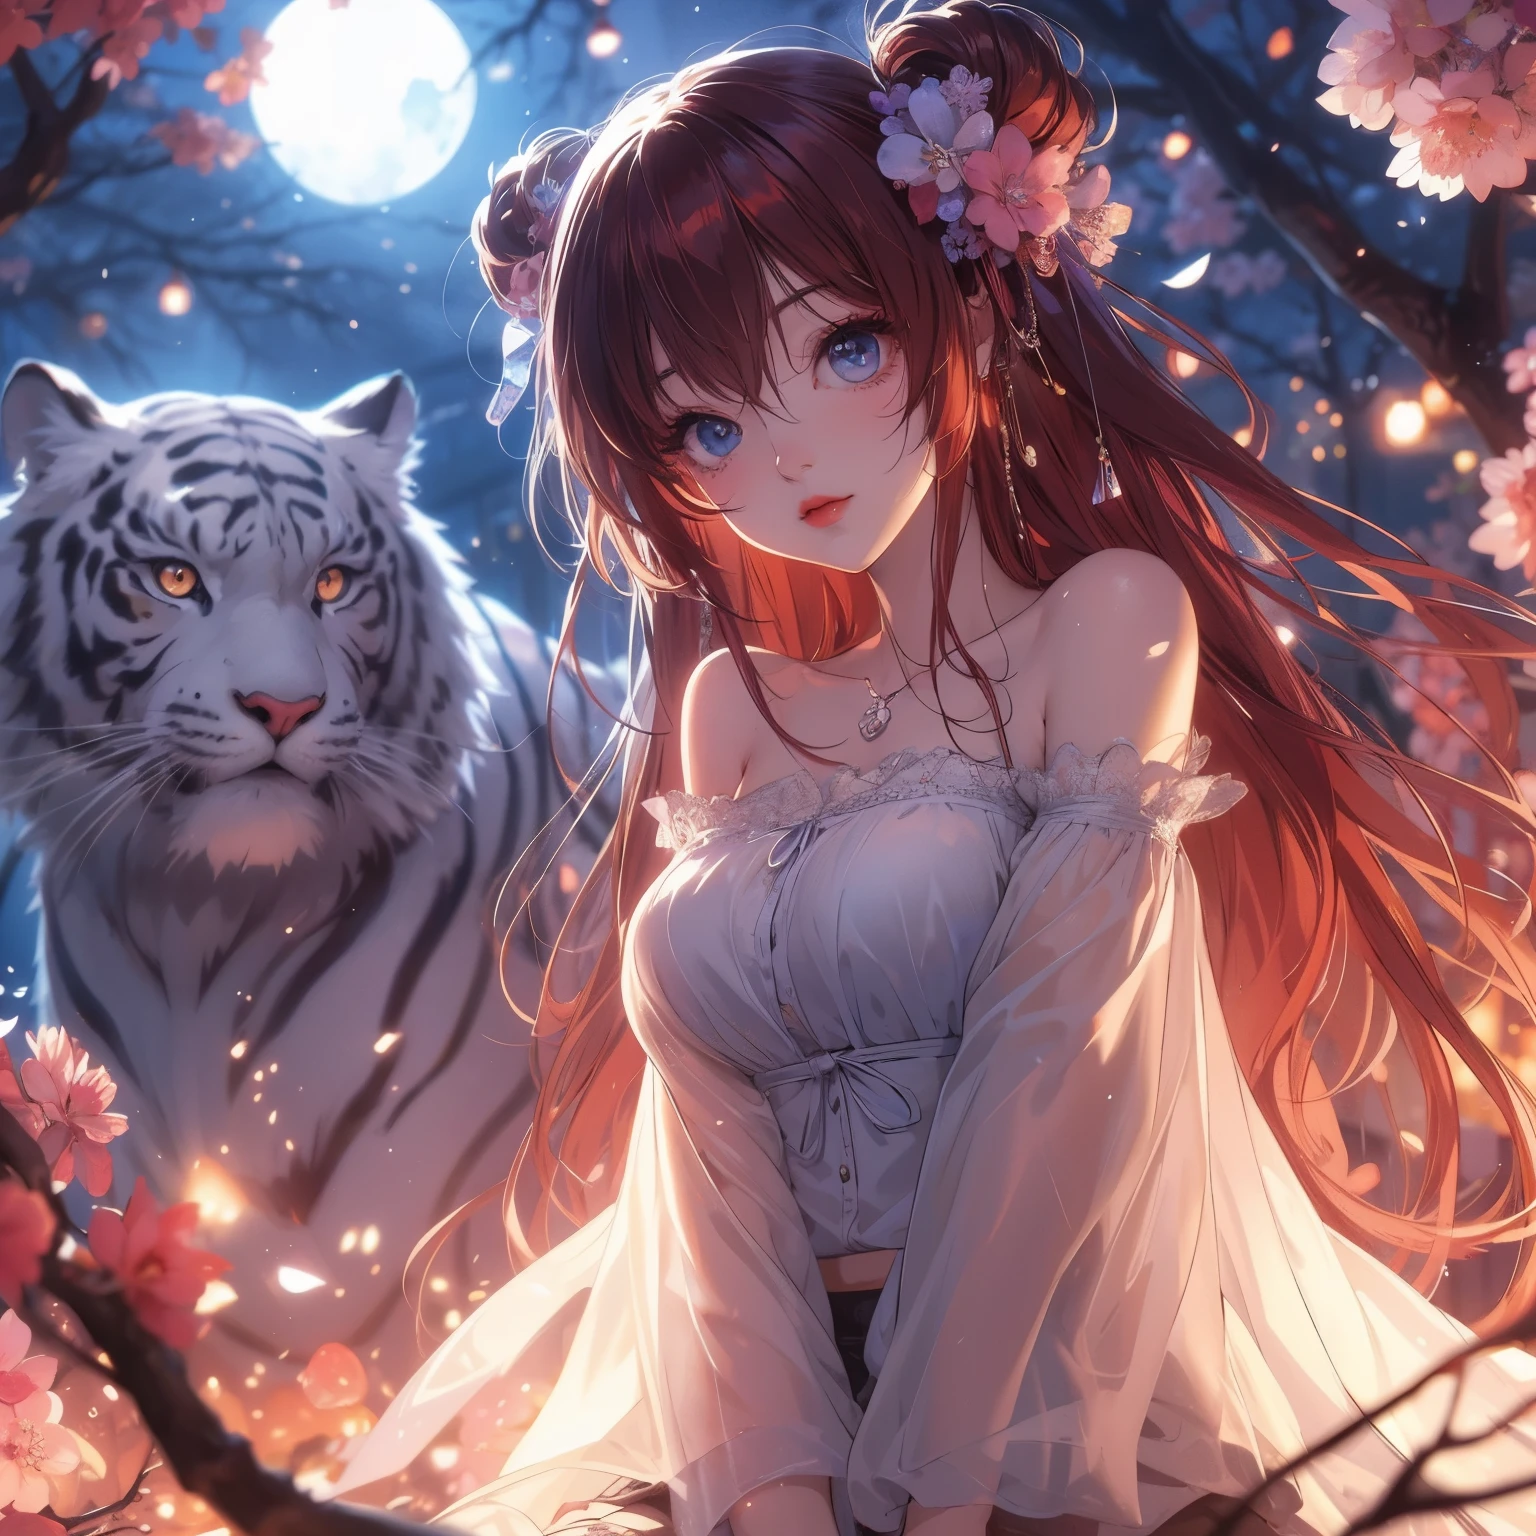 Anime girl with blue eyes and white tiger in background, anime style 4 k, anime art wallpaper 4k, Anime Art Wallpaper 4k, anime art wallpaper 8k, 4k anime wallpaper, 4k comic wallpaper, Beautiful anime Catwoman, anime wallpaper 4k, anime wallpaper 4k, beautiful anime style, anime style. 8k